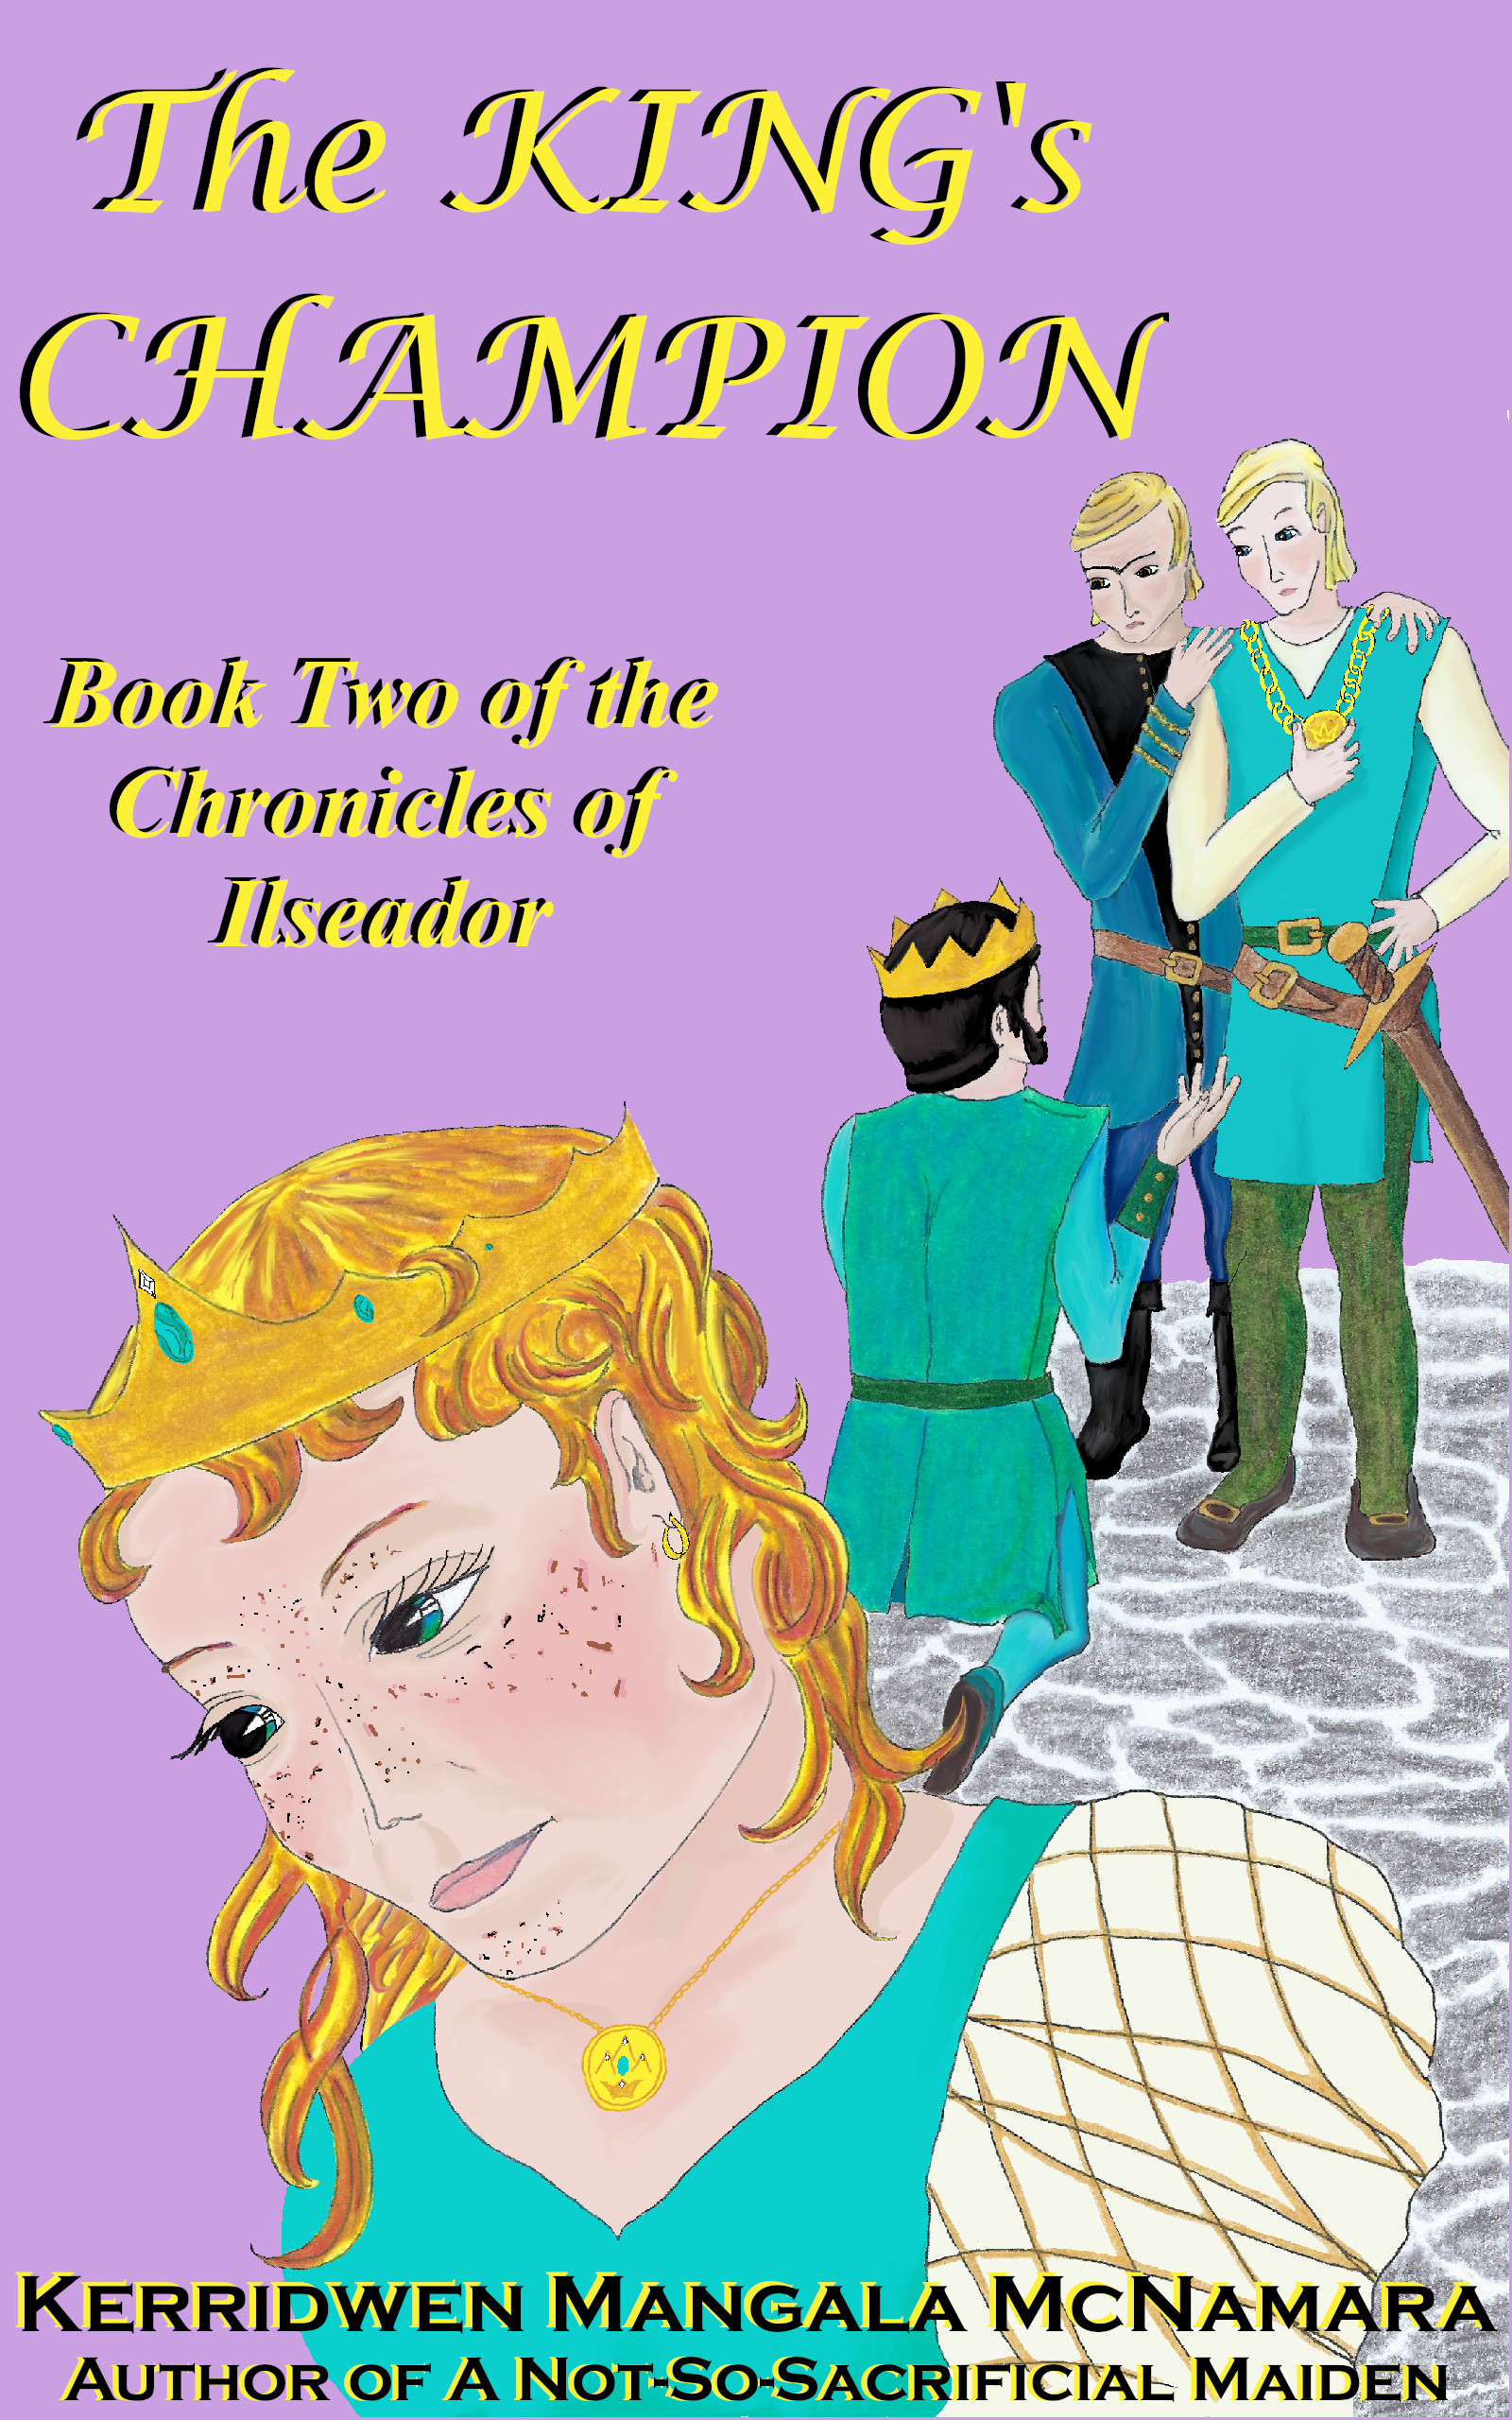 Cover for book: The King's Champion: Book Two of the Chronicles of Ilseador